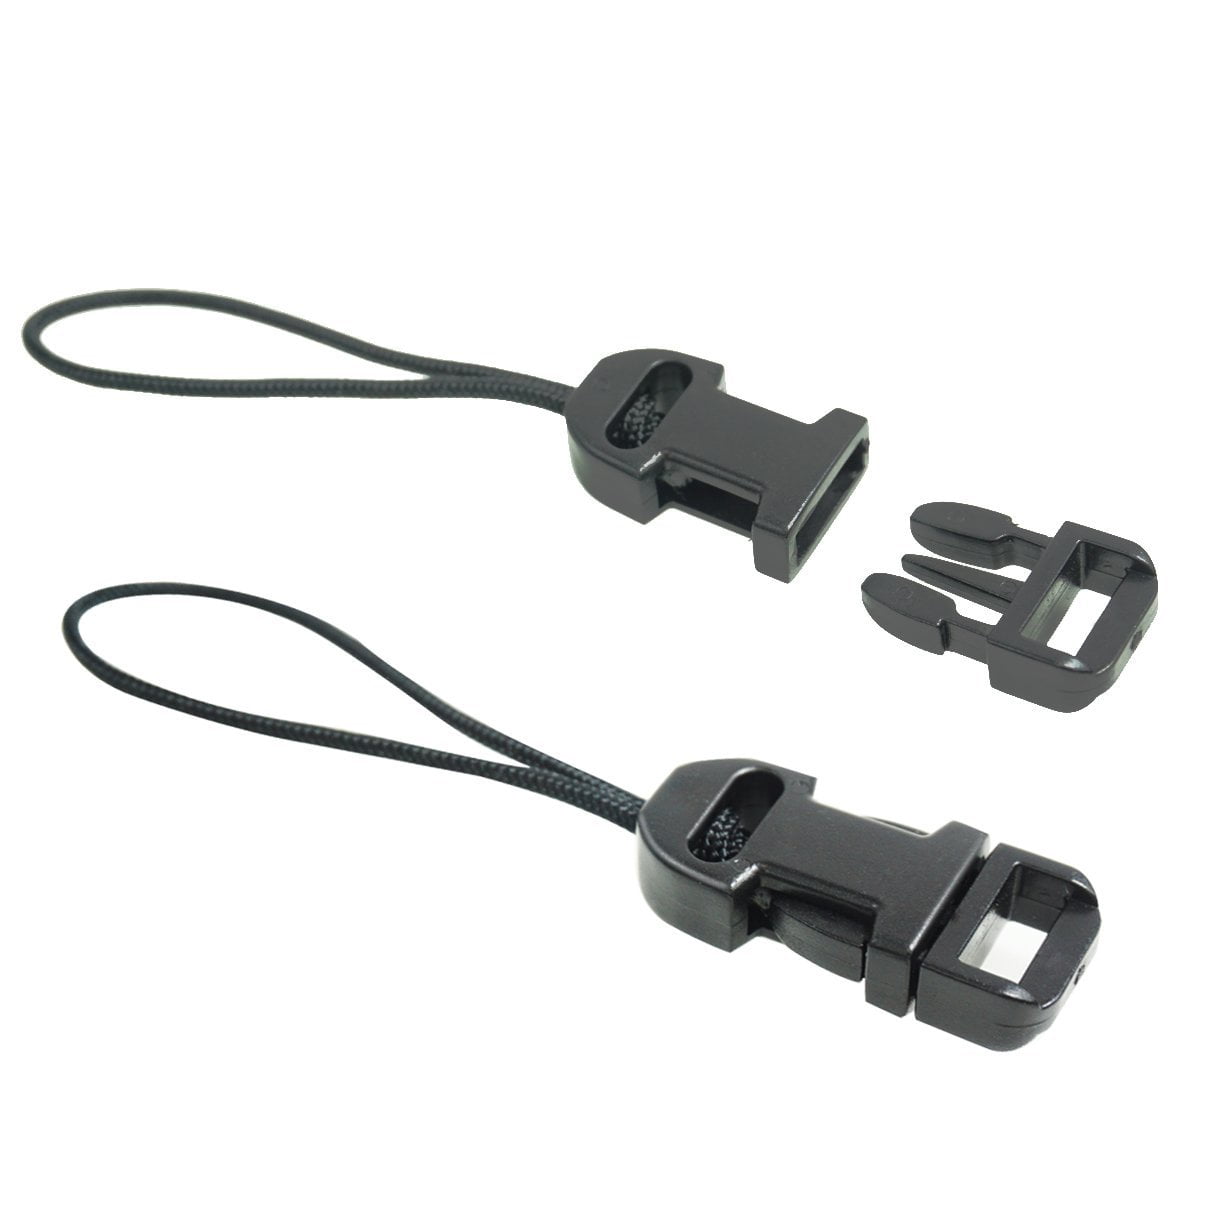 Canon PowerShot A2300 is Neck Strap Lanyard Style Adjustable with Quick-Release.